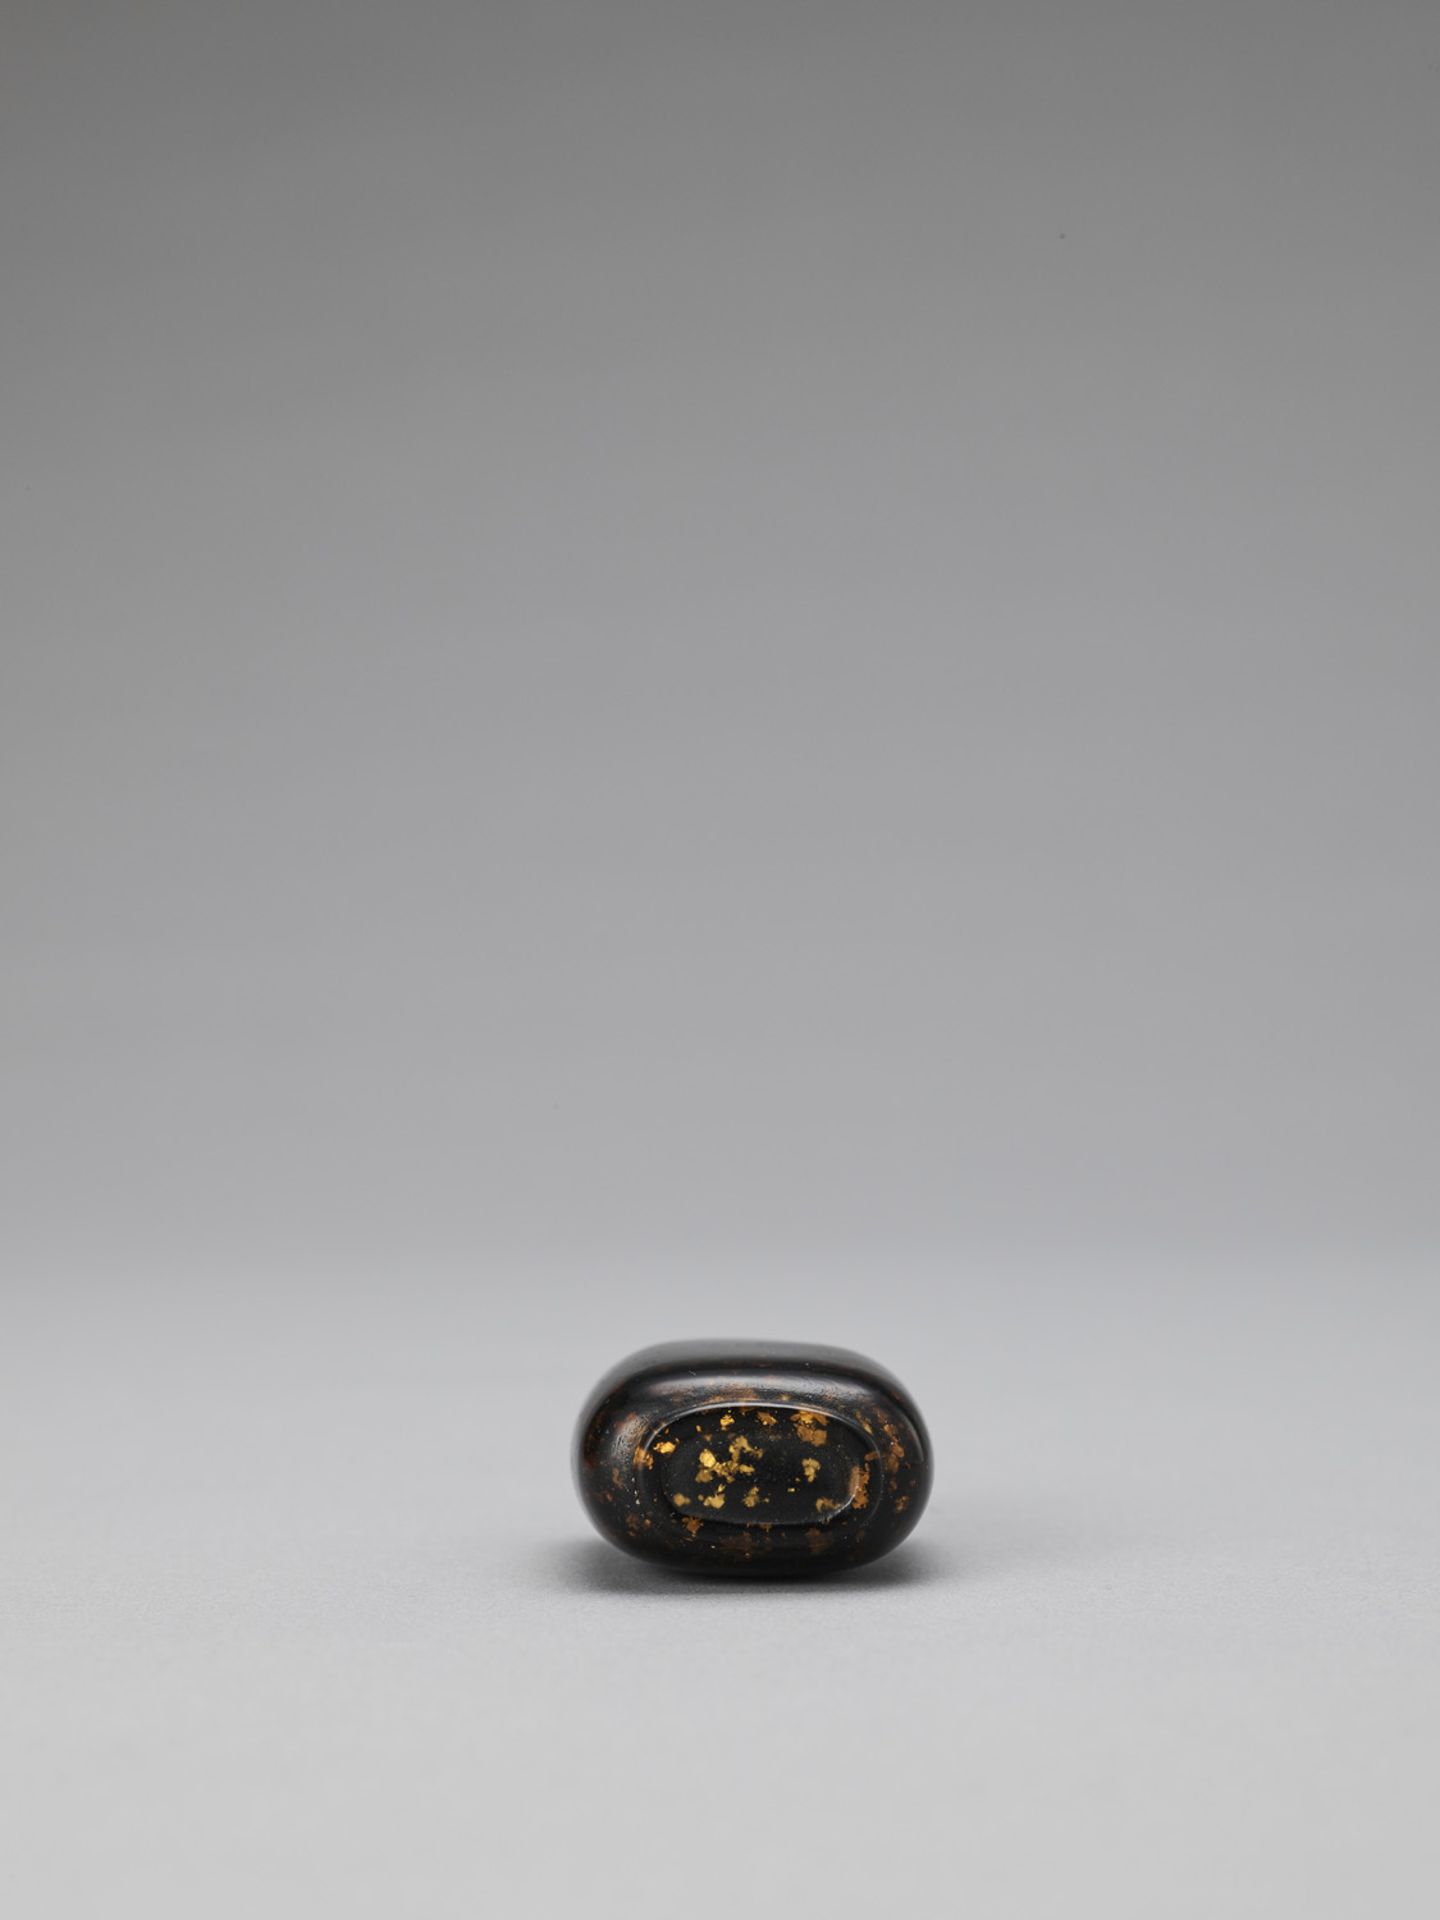 A GOLD-SPECKLED AMBER AVENTURINE GLASS SNUFF BOTTLE, QING - Image 6 of 6